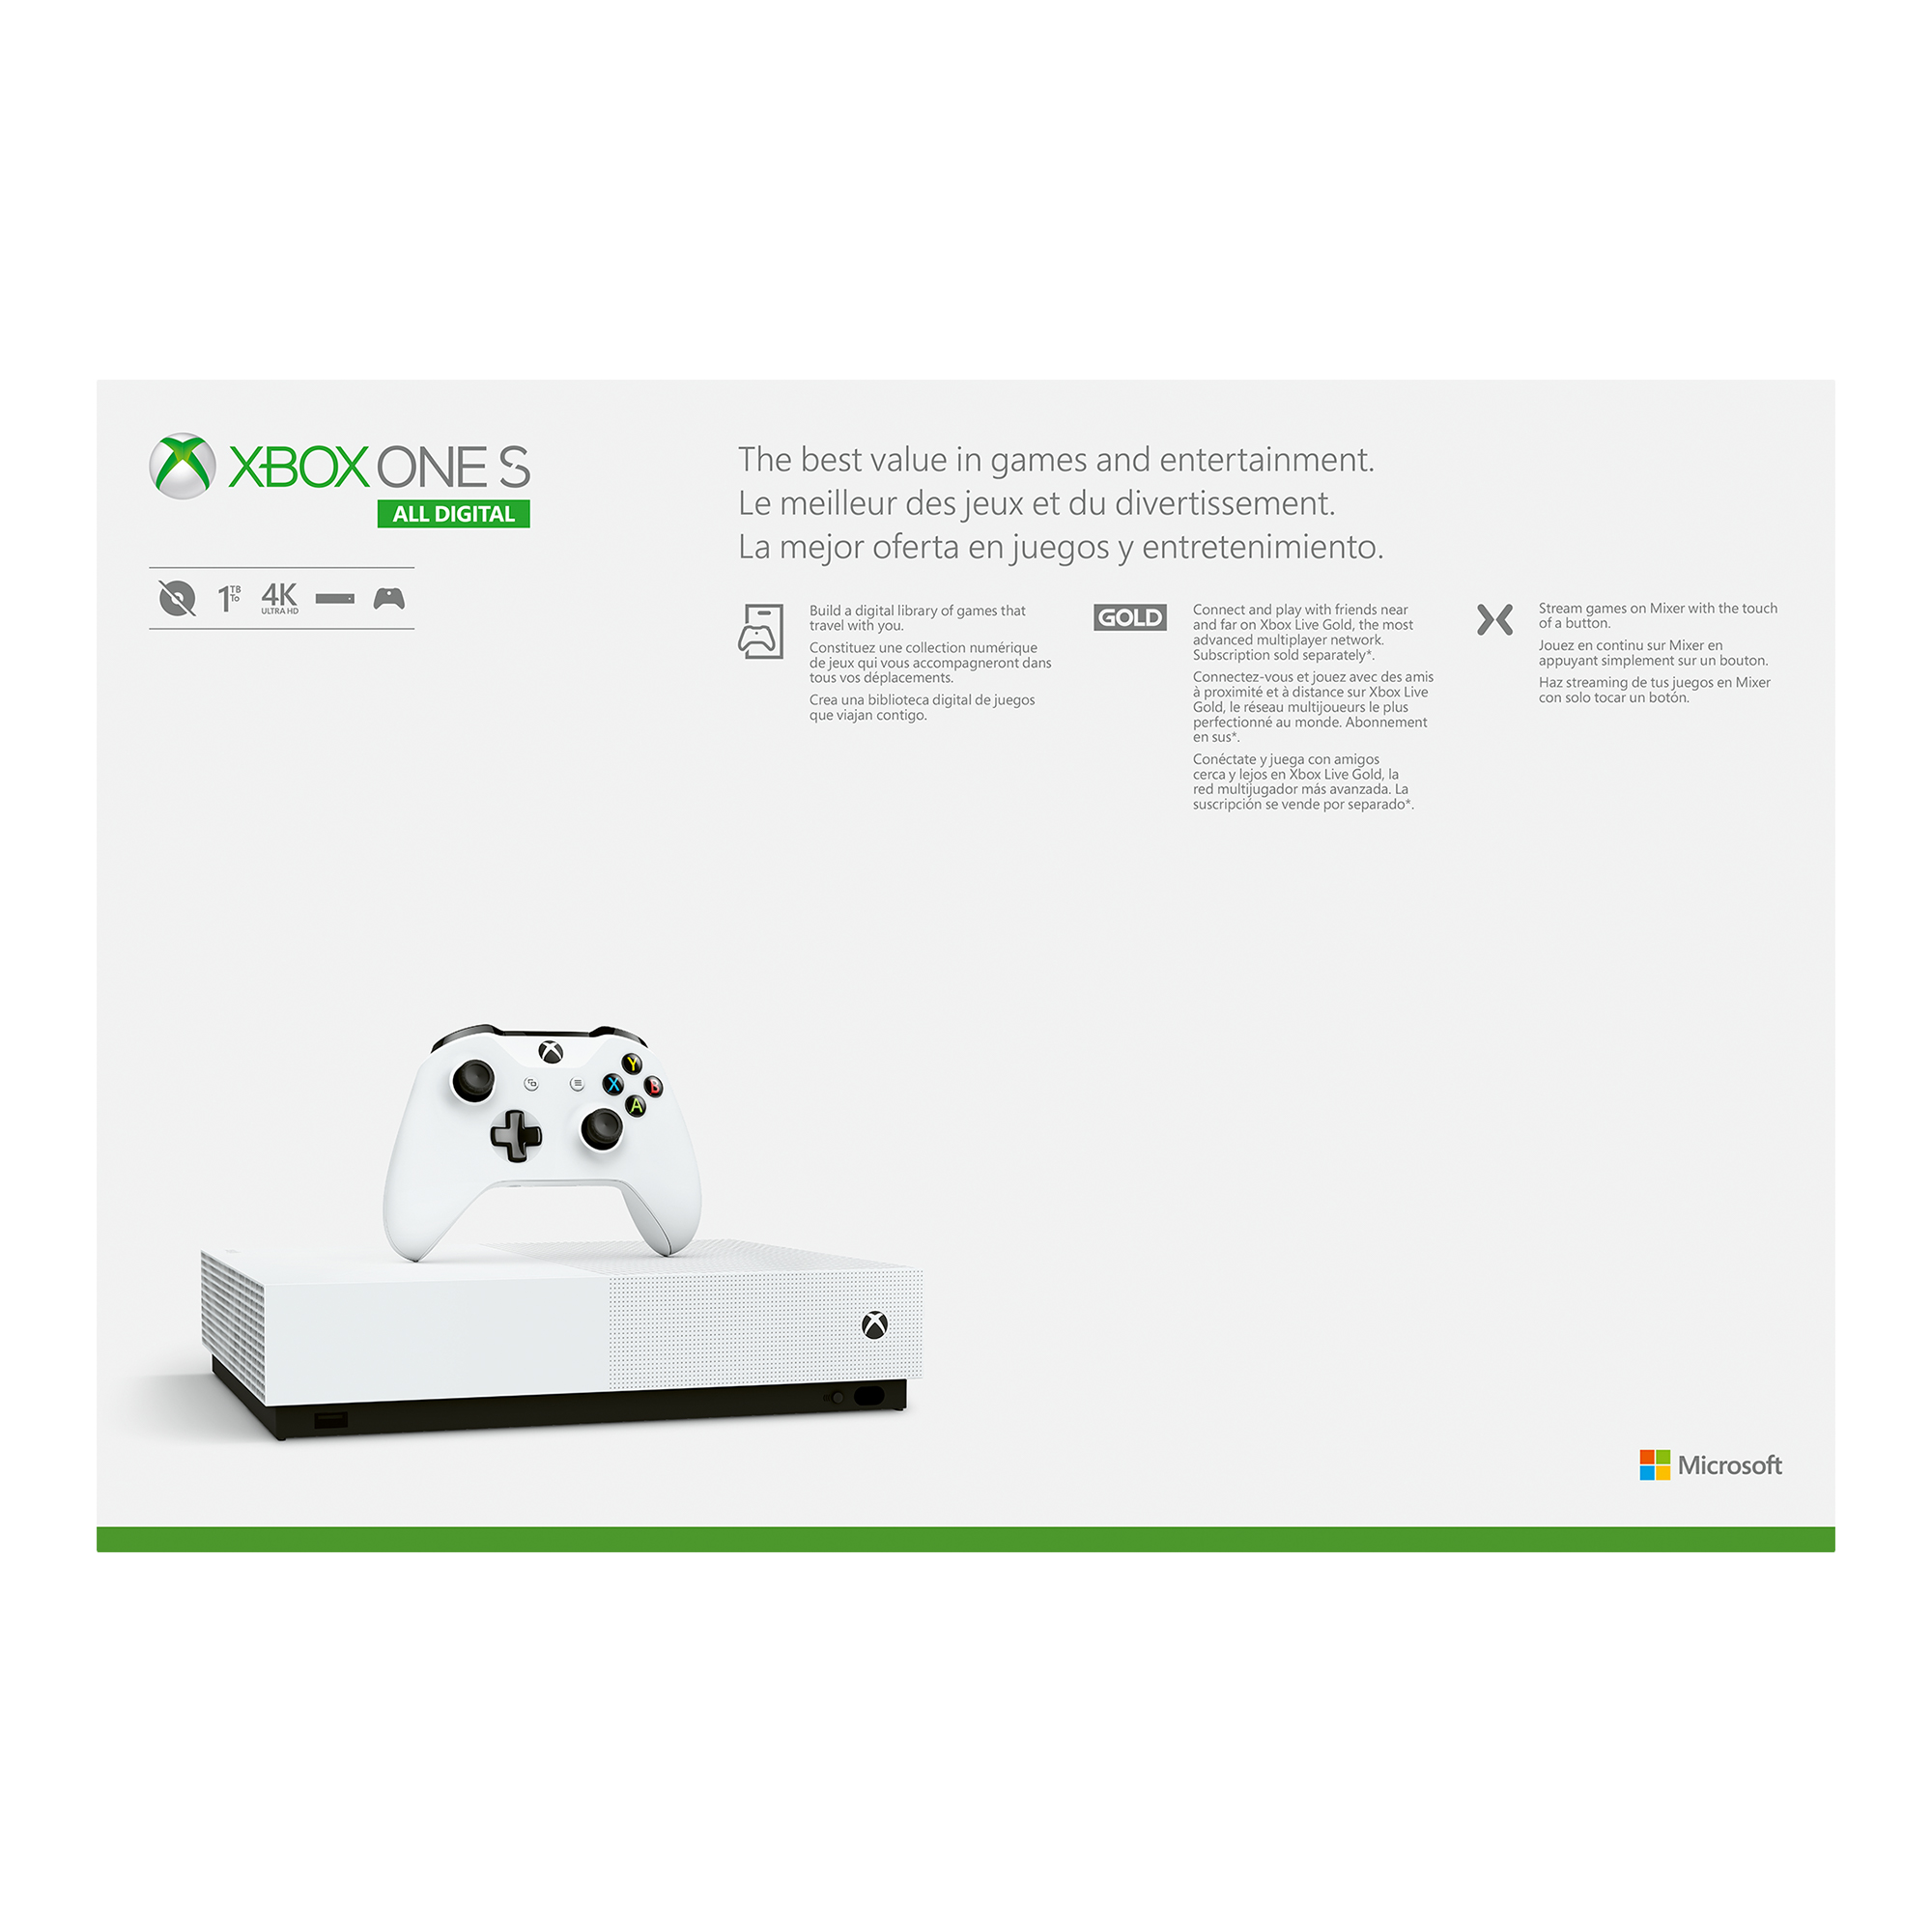 Microsoft Xbox One S 1TB All Digital Edition 3 Game Bundle (Disc-free Gaming), White, NJP-00050 - image 12 of 13